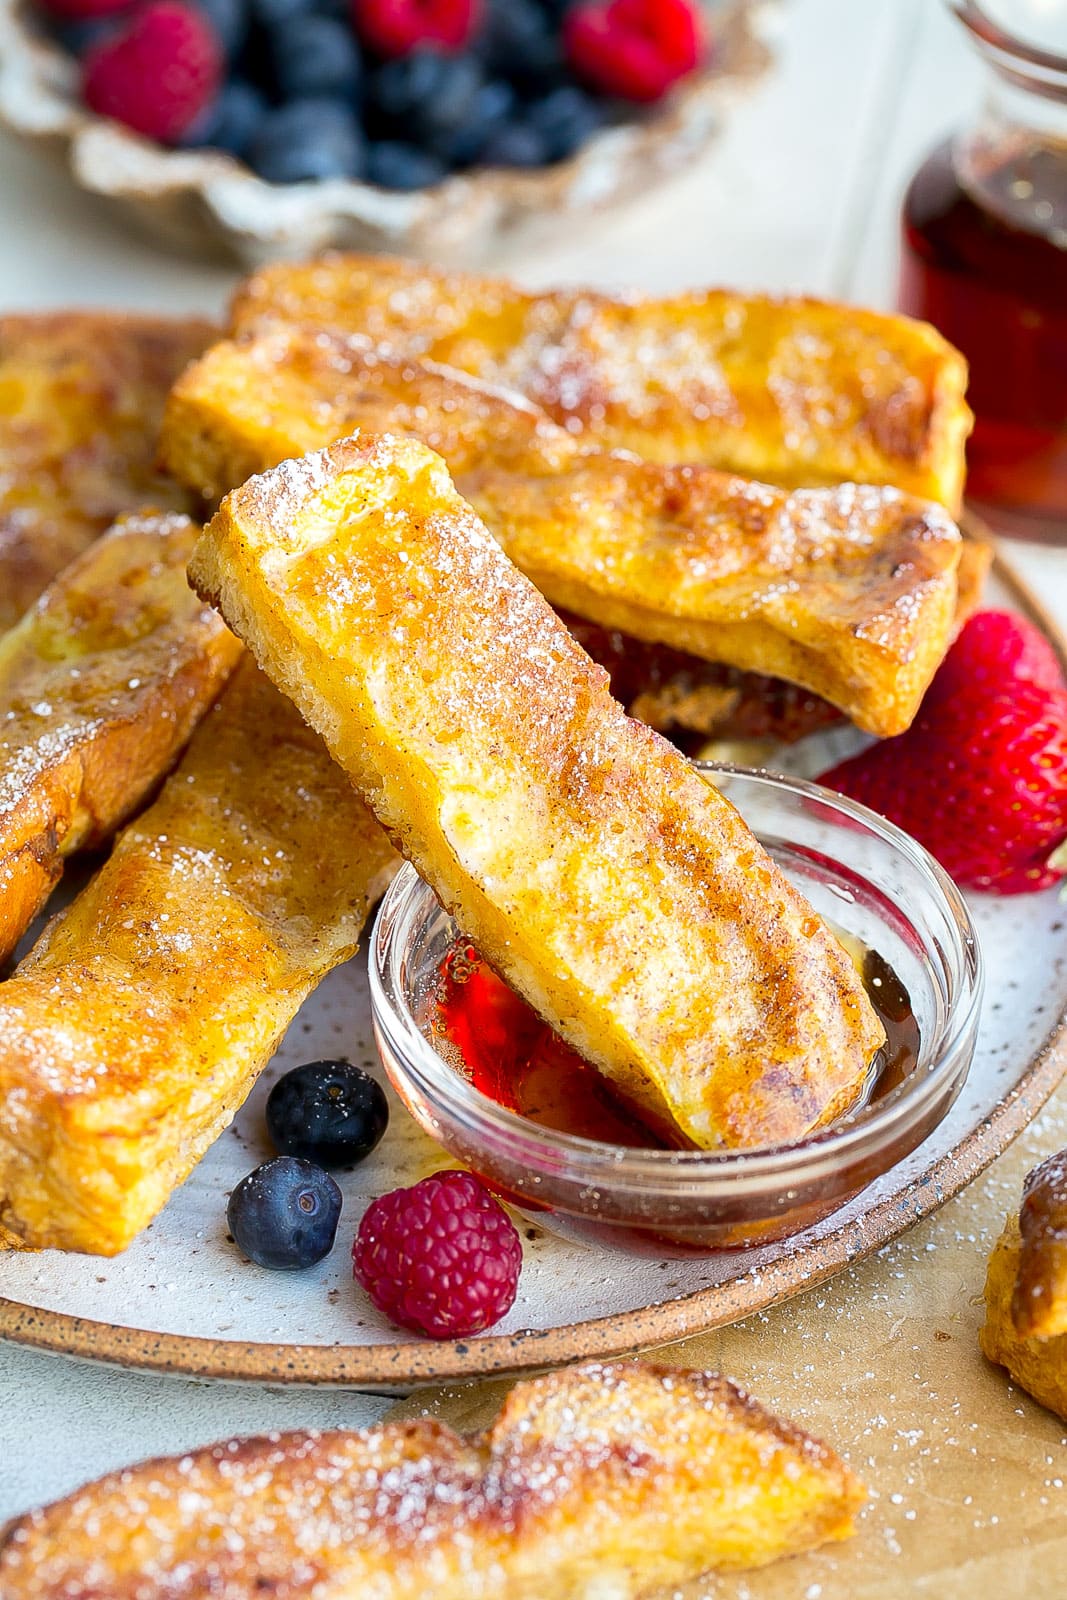 French toast stick in syup.